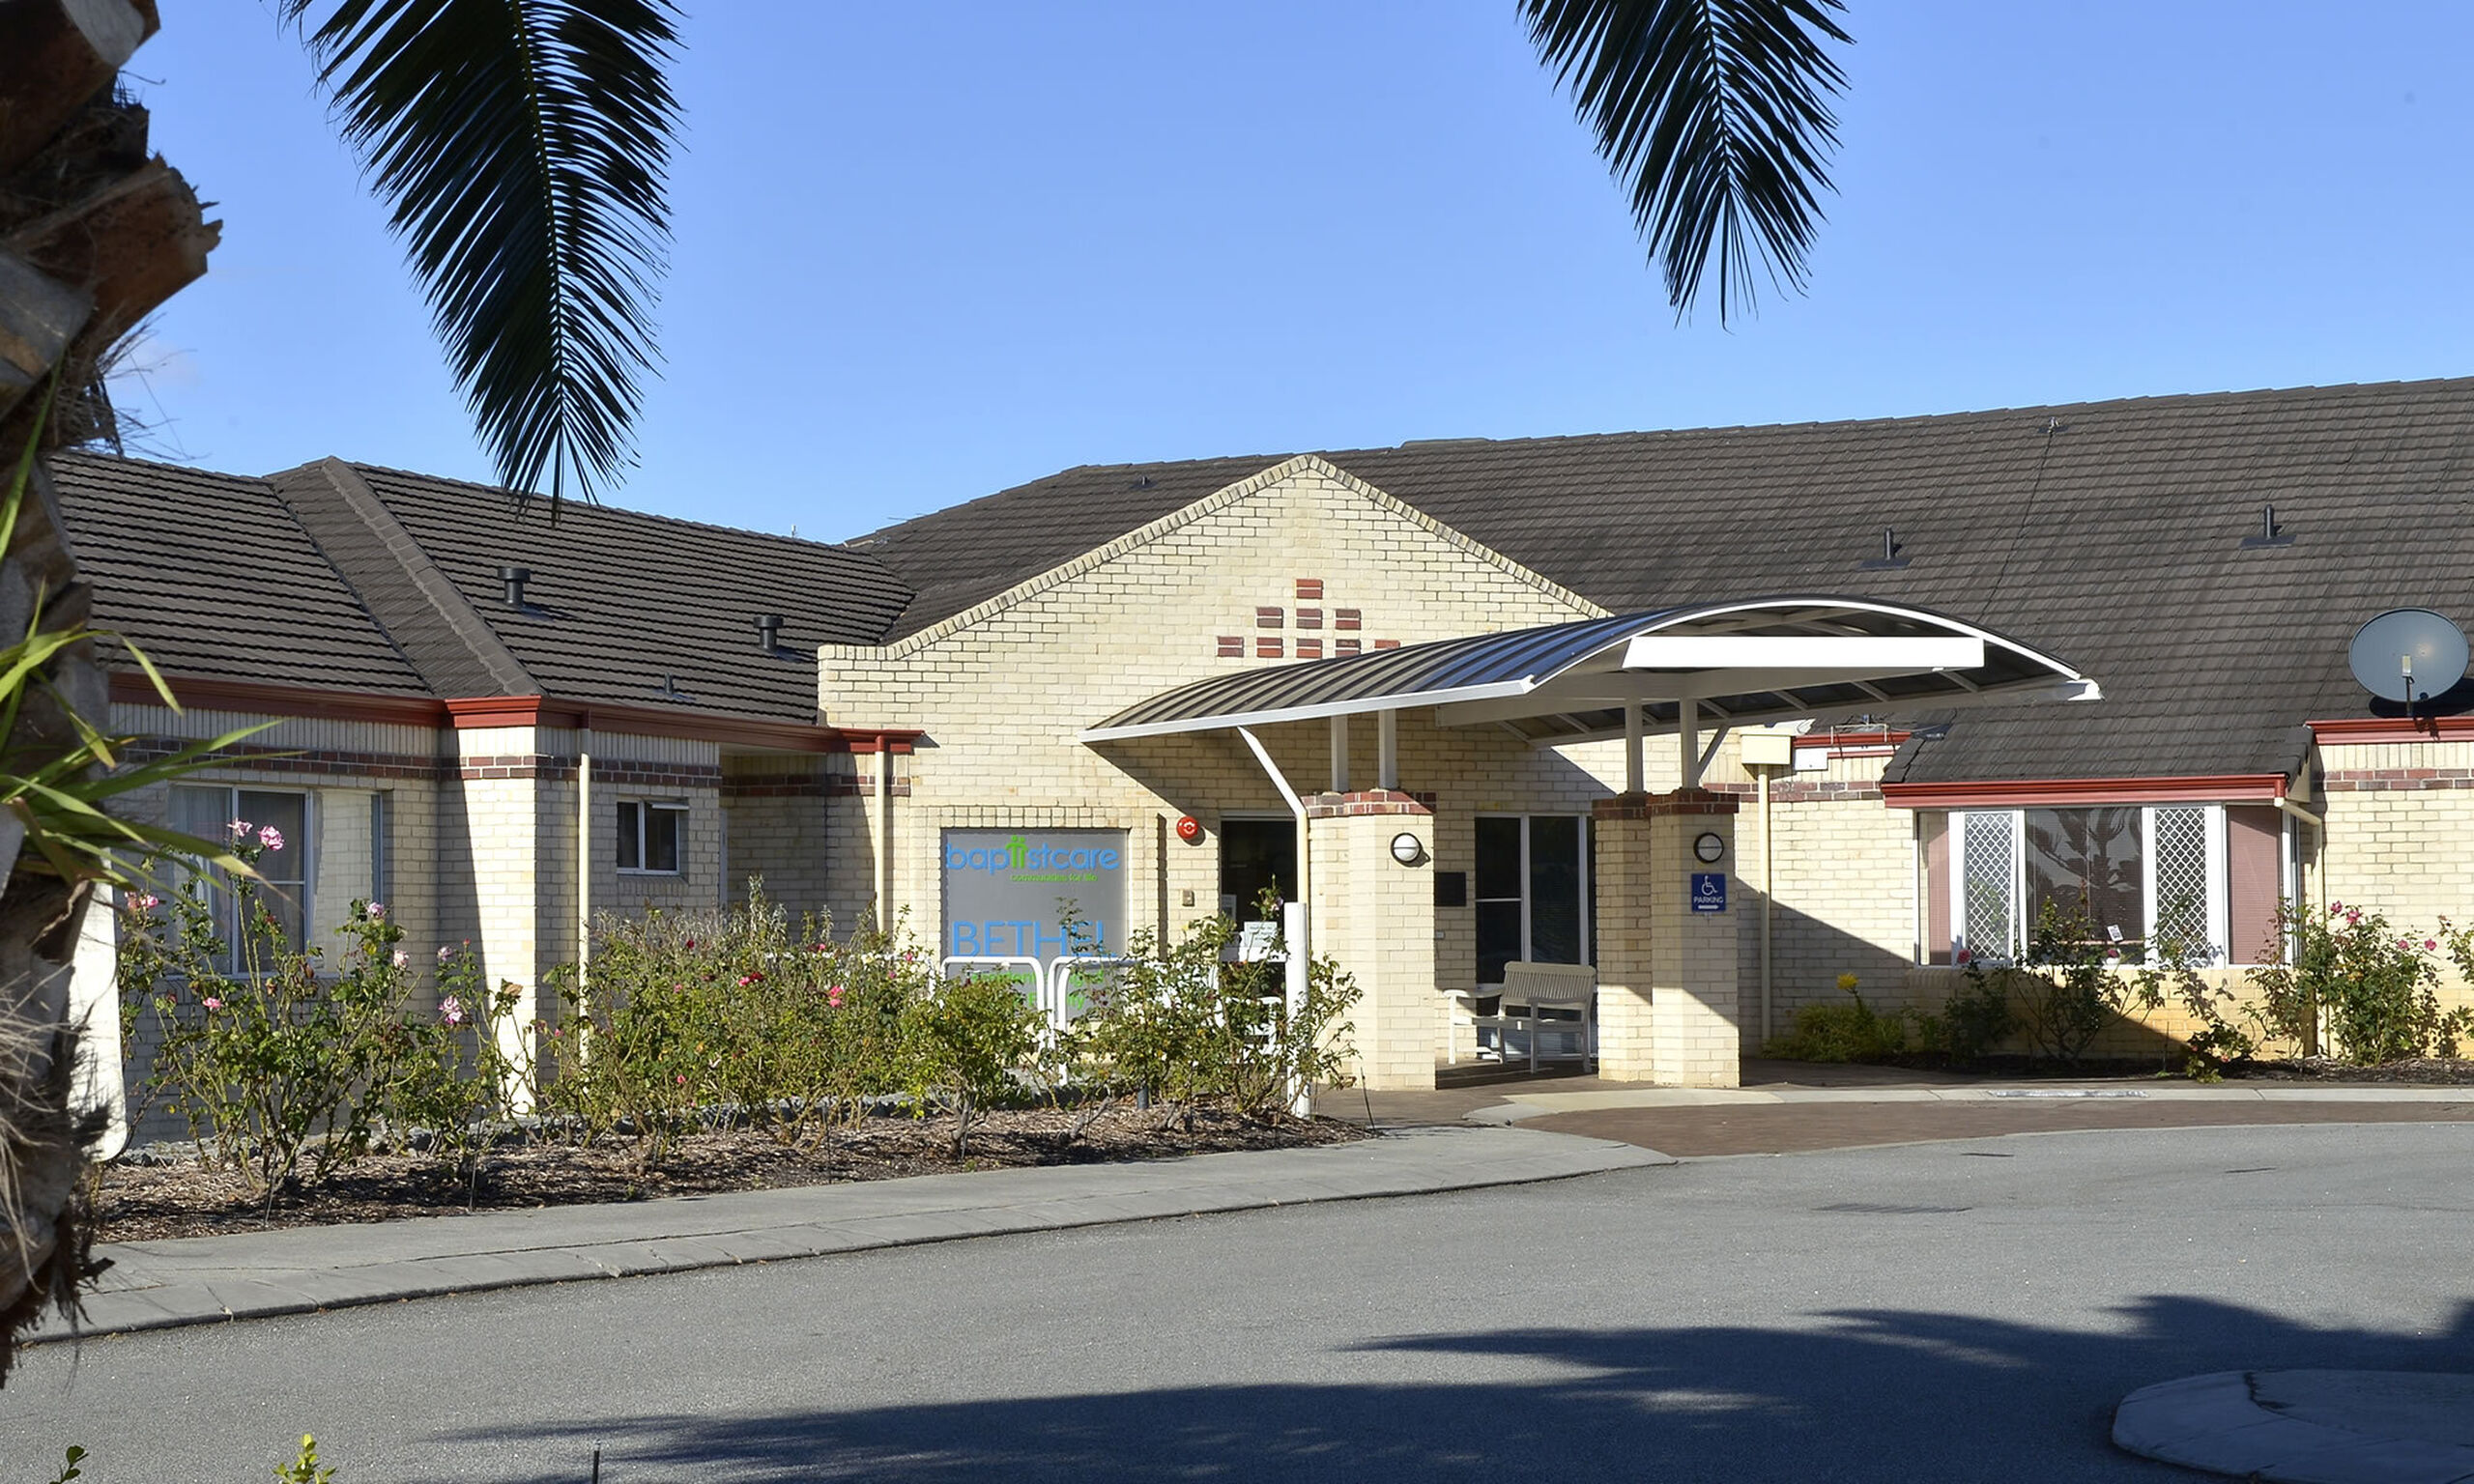 main entry for nursing home residents at baptistcare bethel aged care home in albany wa